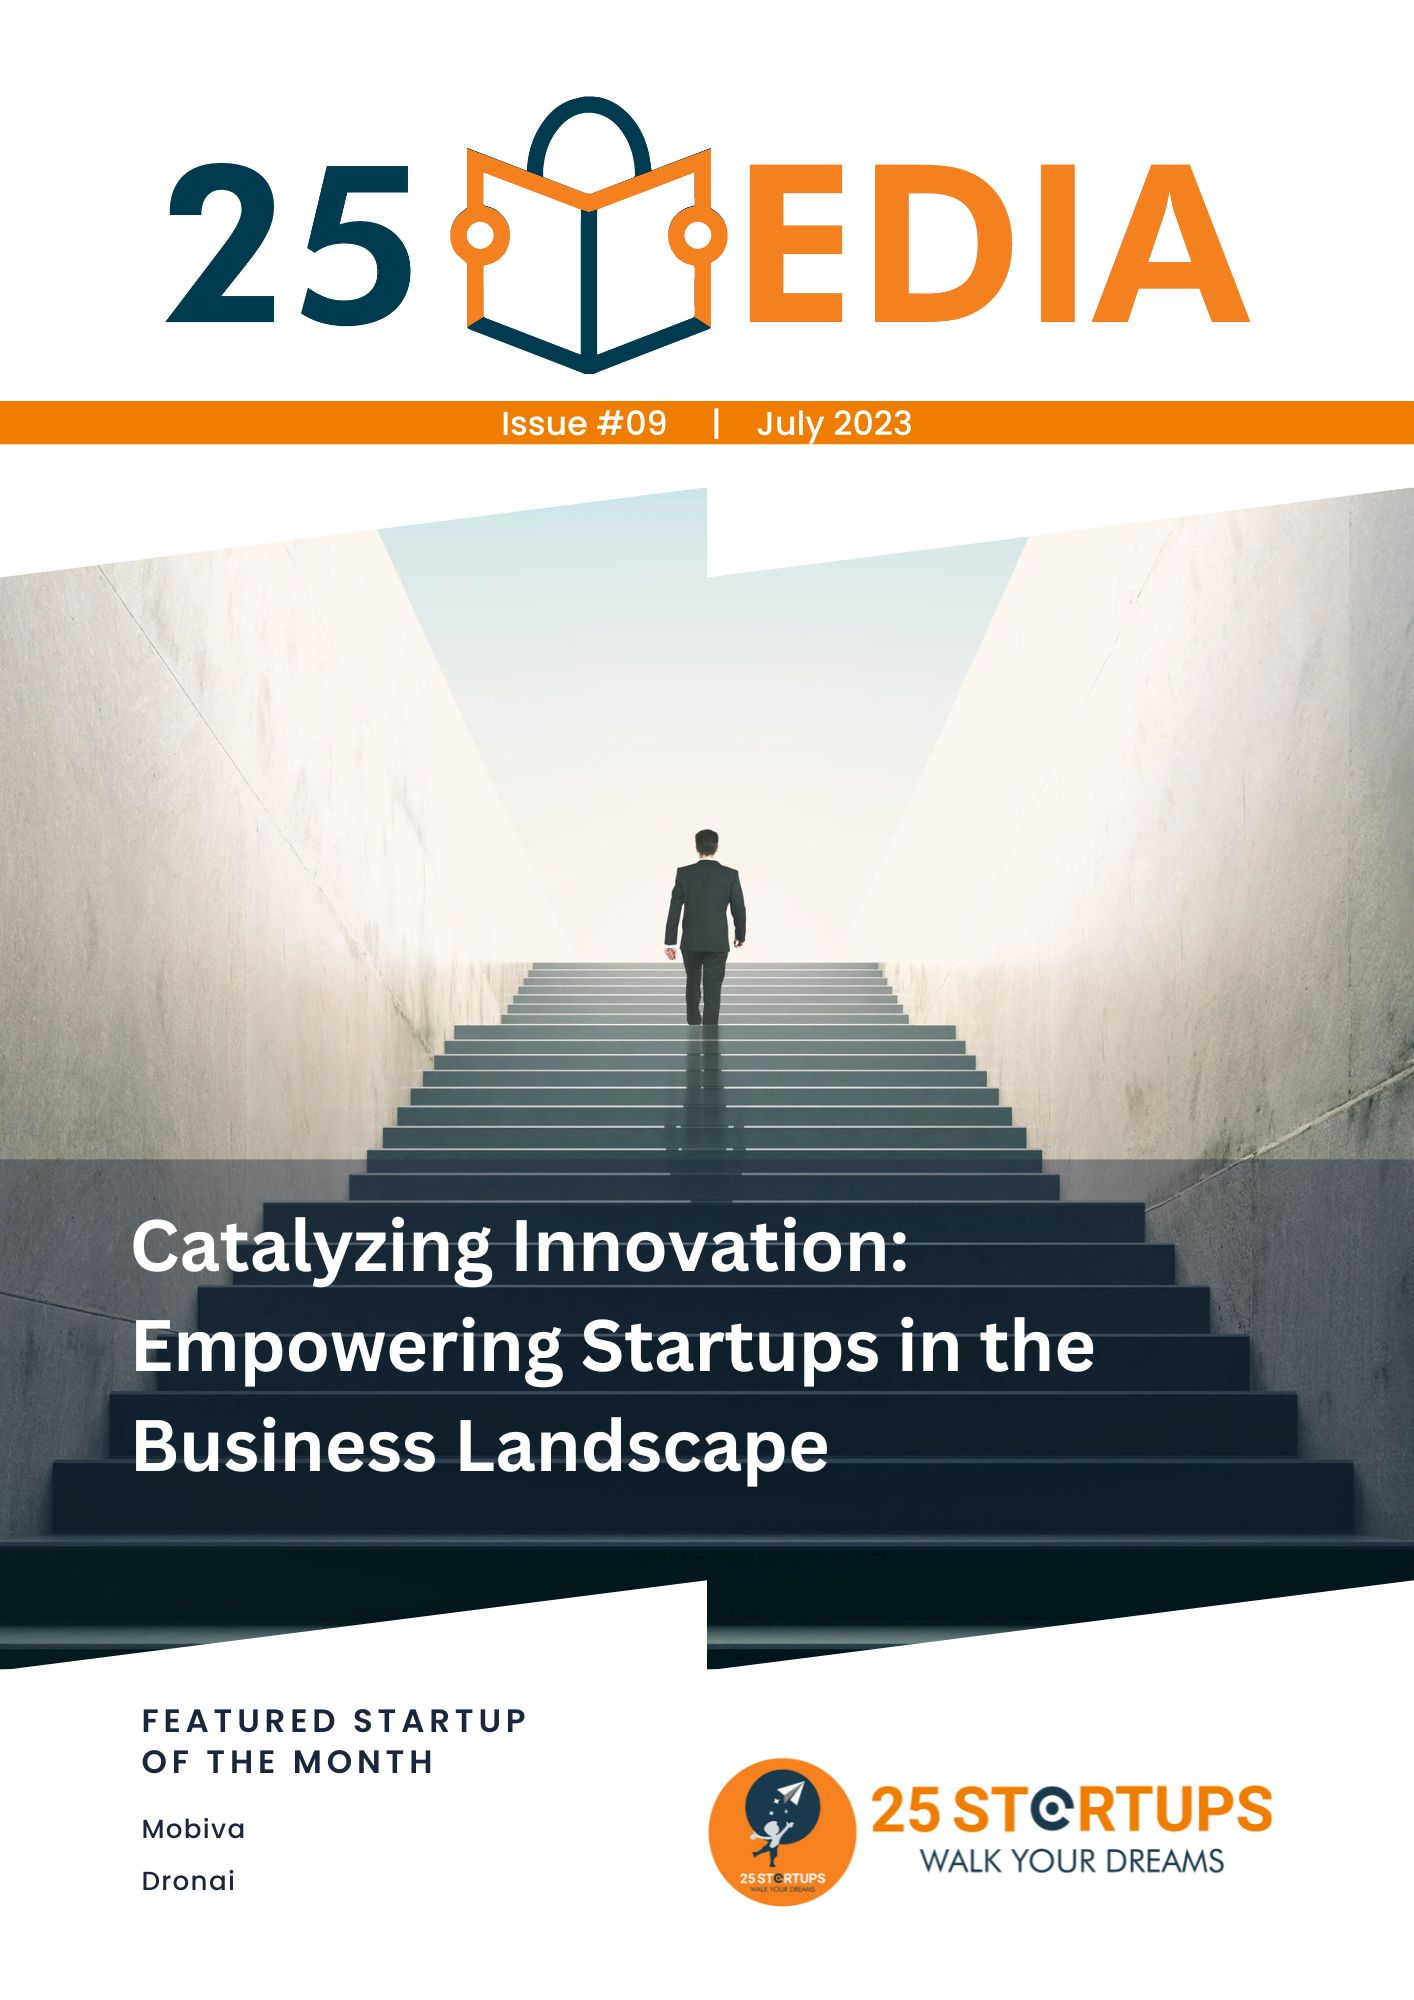 25 Media Issue #09: Catalysing Innovation: Empowering Startups in the Business Landscape